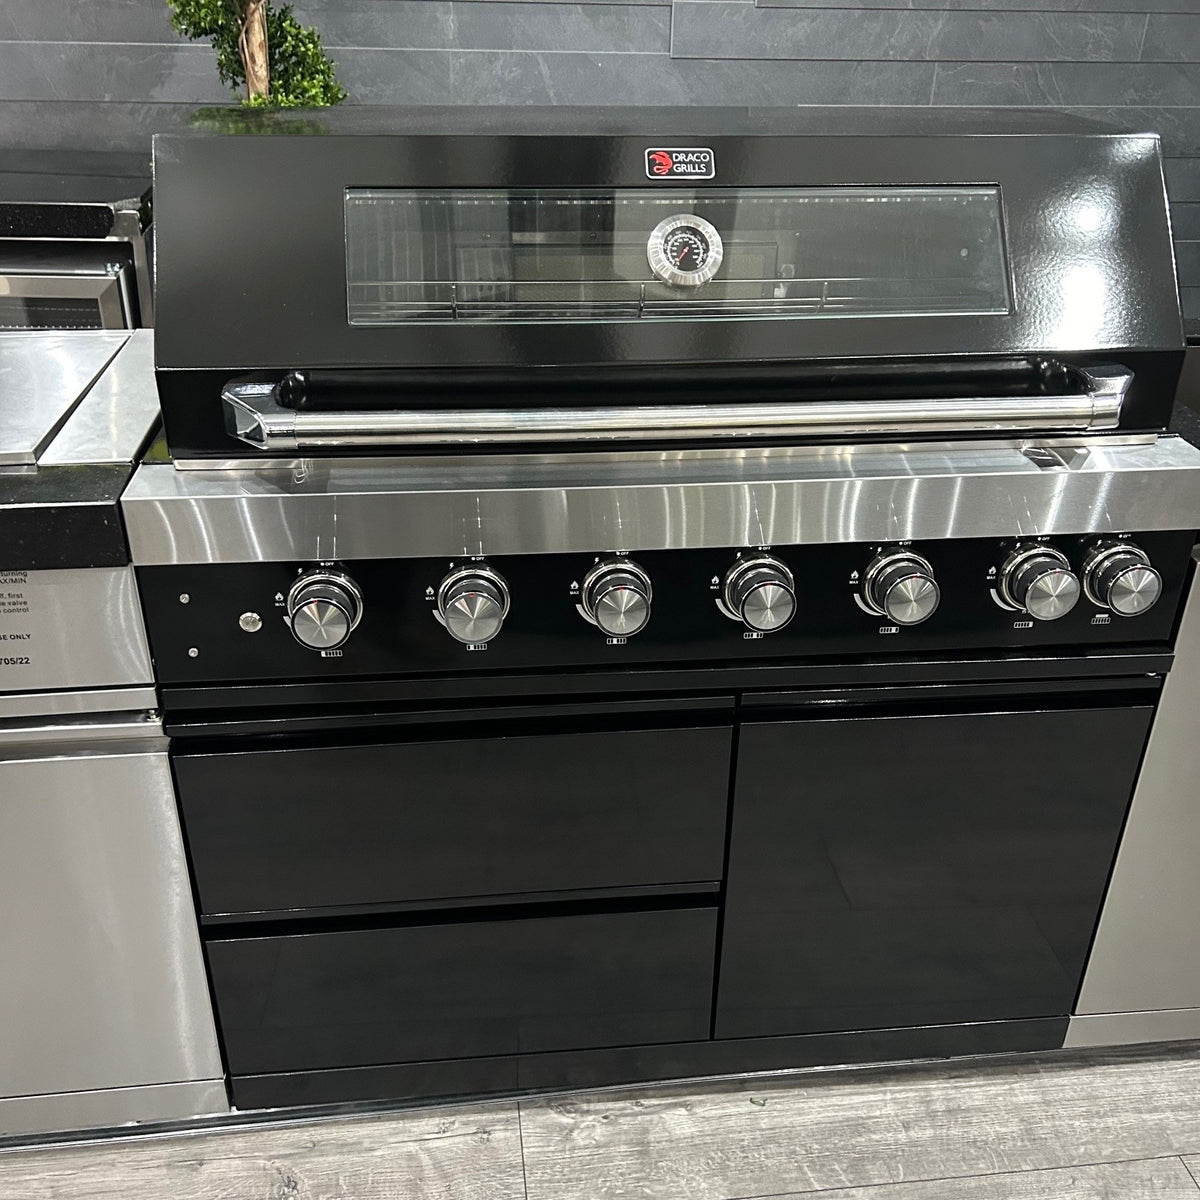 Ex Display Draco Grills 6 Burner BBQ Black Modular Outdoor Kitchen with Stainless Steel Sear Station, Sink and Fridge Unit and Twin Drawer Unit